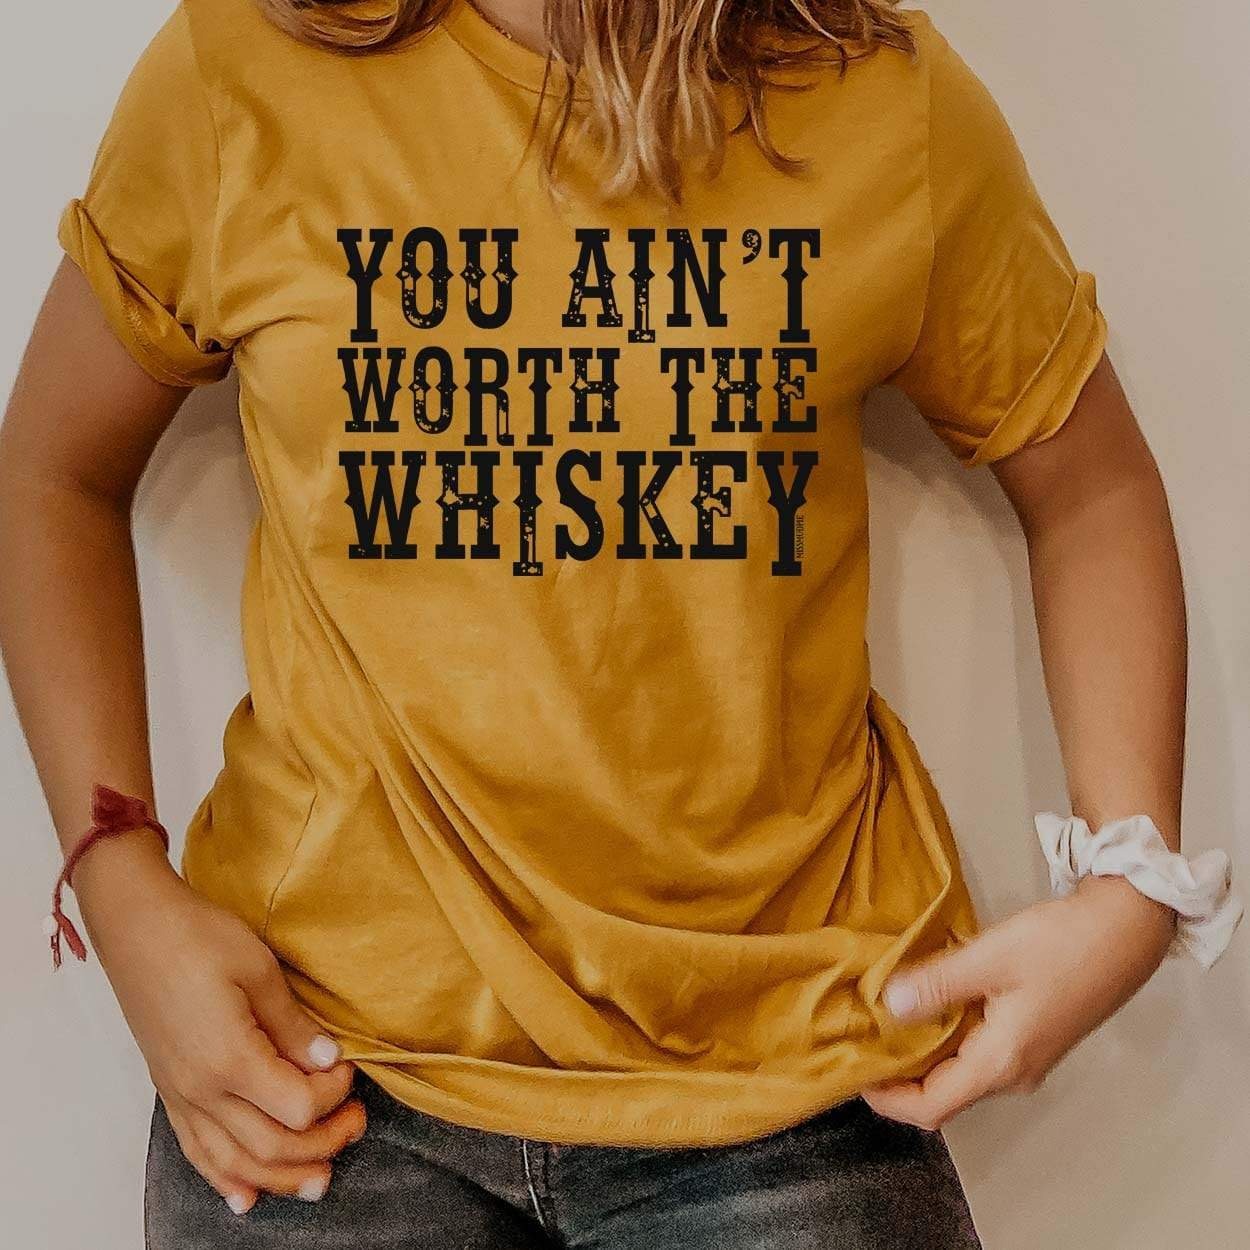 You Ain't Worth the Whiskey